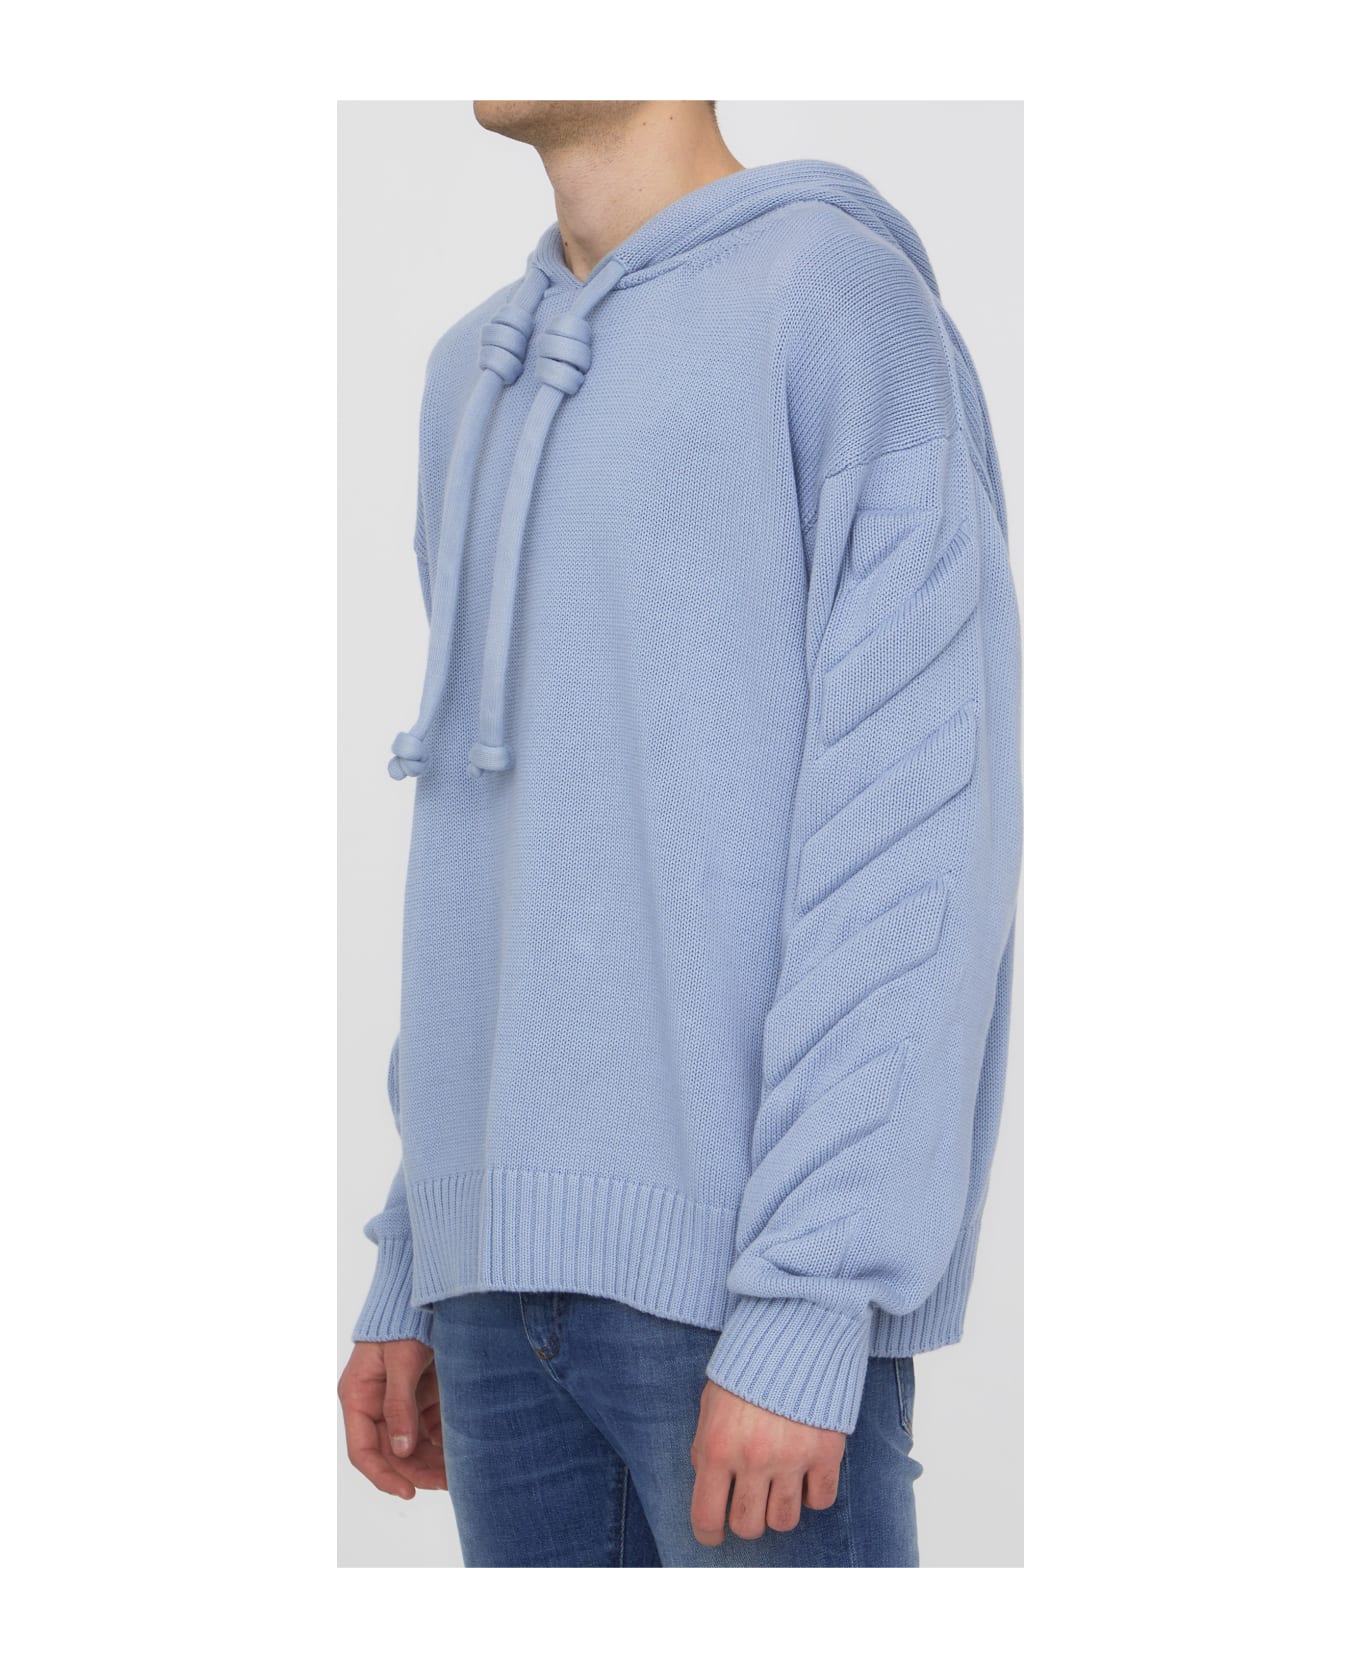 Off-White 3d Diag Knit Hoodie - Light Blue